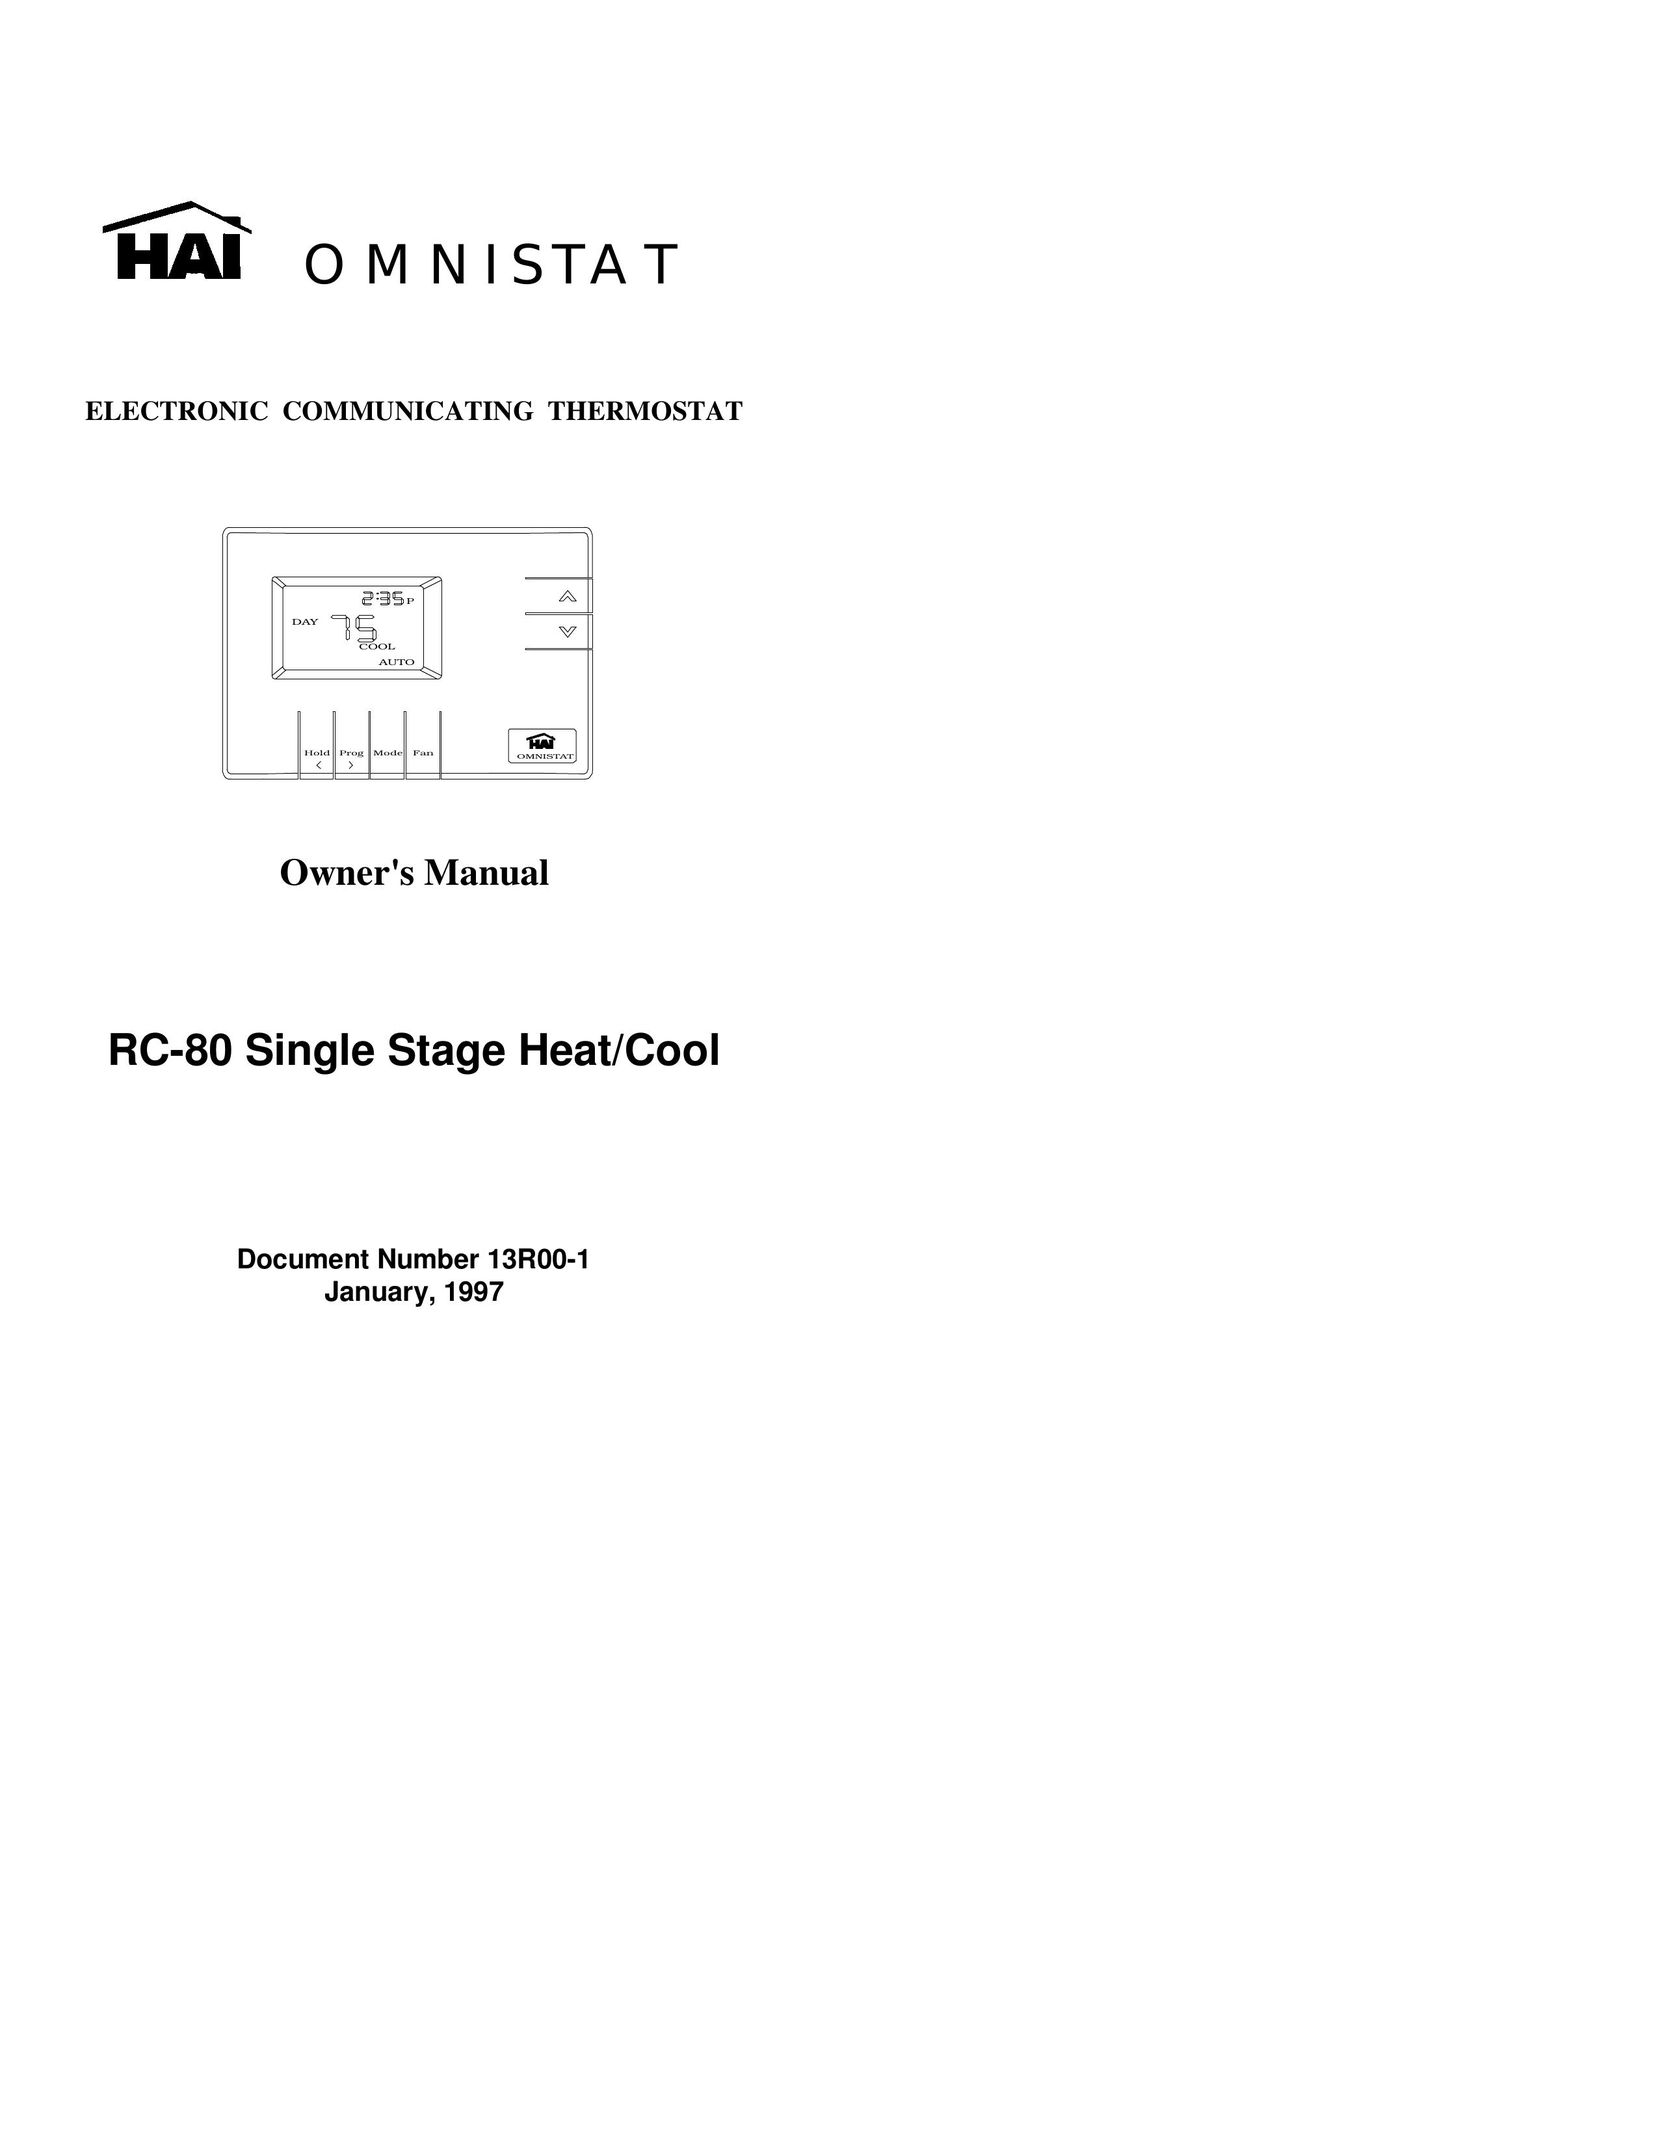 Home Automation RC-80 Thermostat User Manual